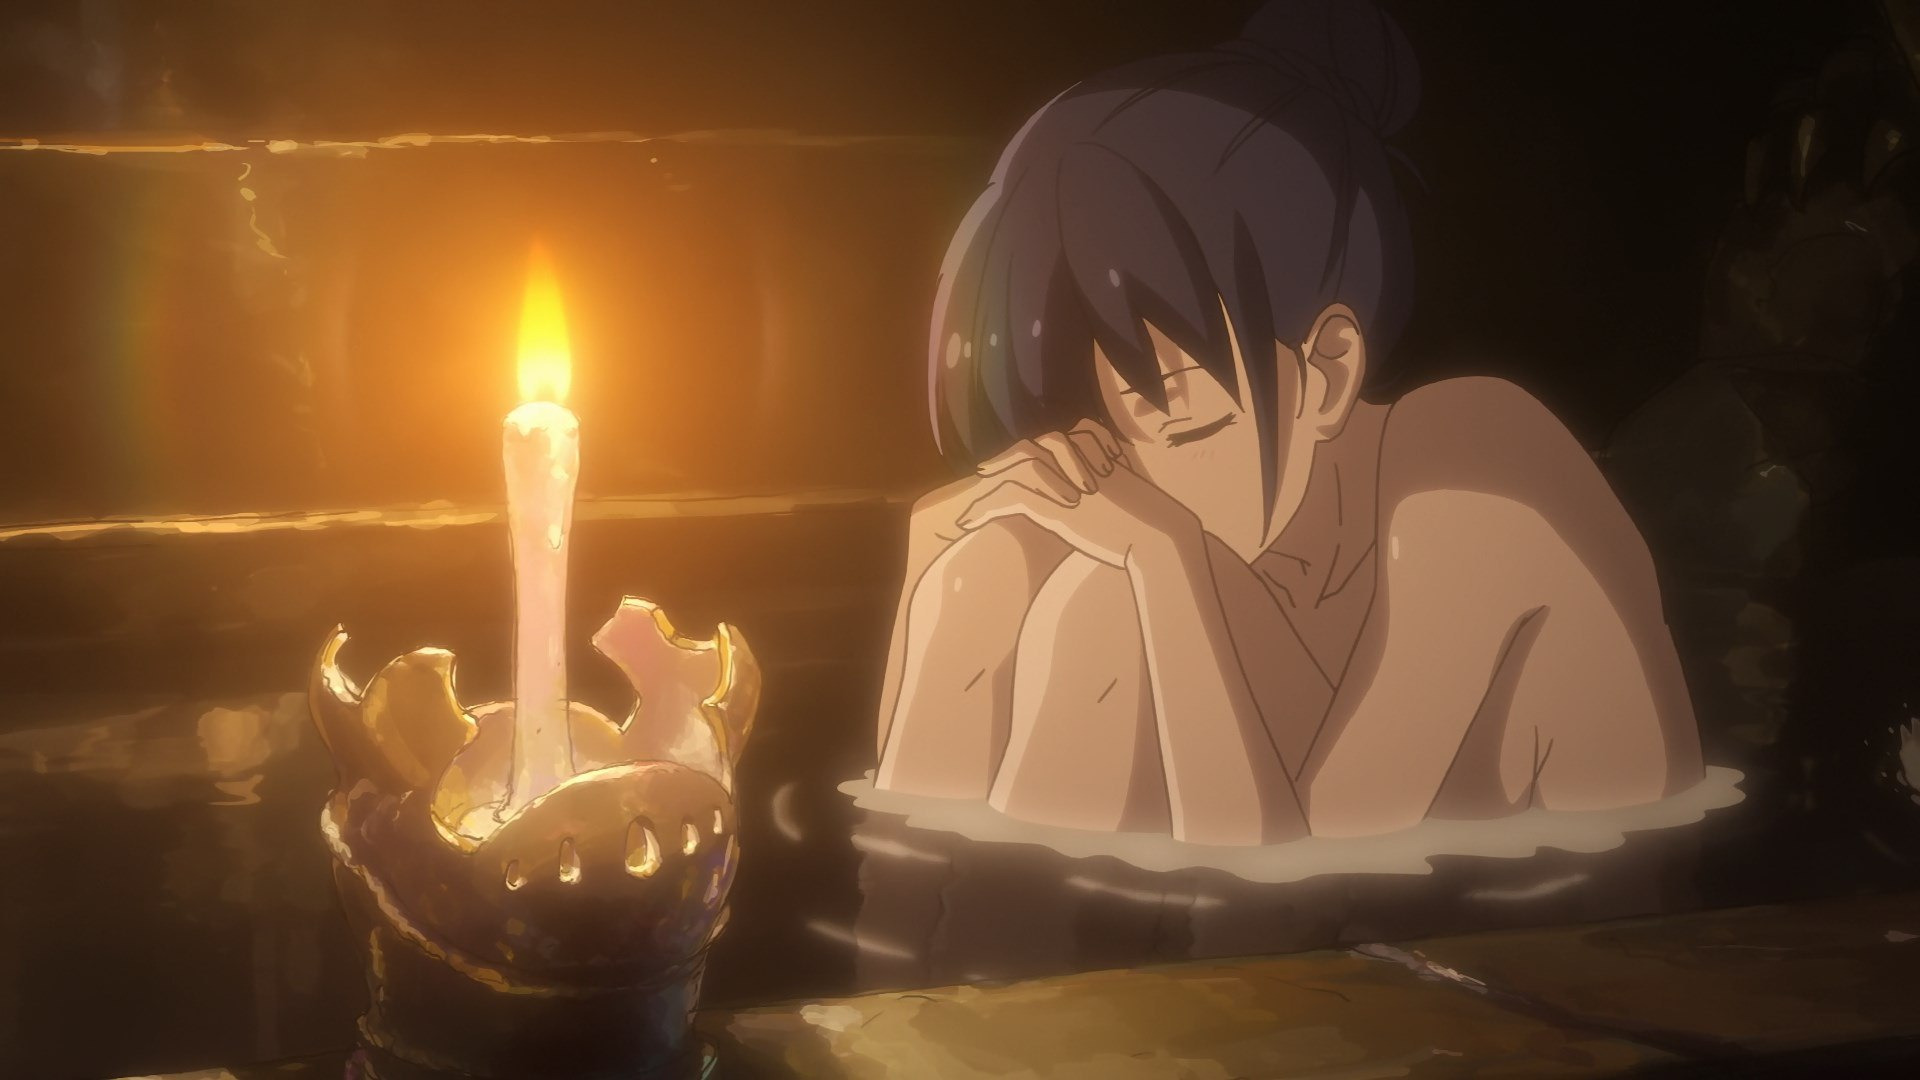 Hai to Gensou no Grimgar — s01 special-1 — 2.5 - Youth Hung on the Bath Wall - One More Centimeter